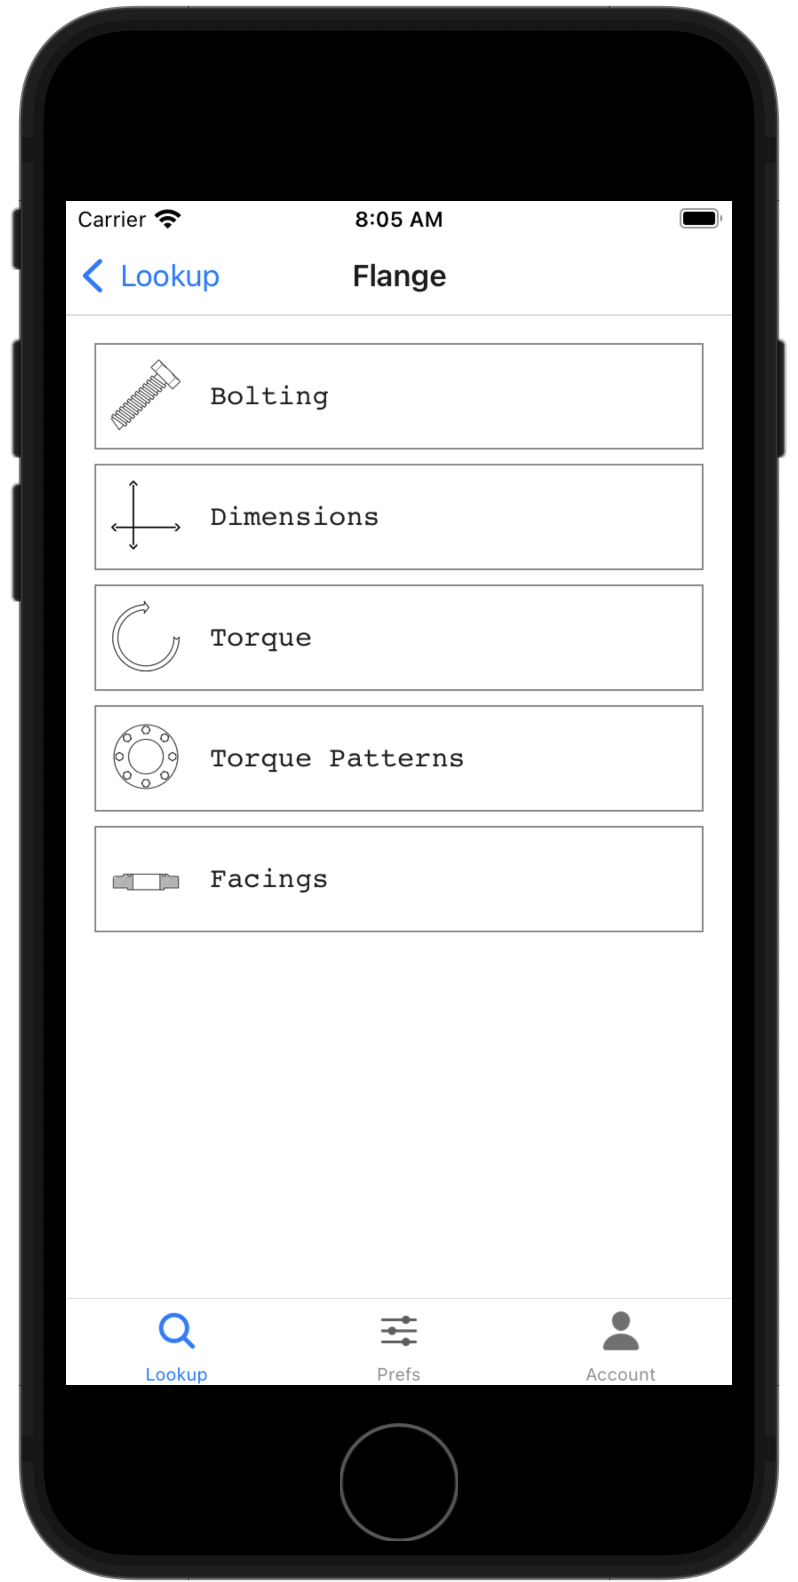 Screenshot of the Flange Bolt Chart app showing data related to ASME B15.5.